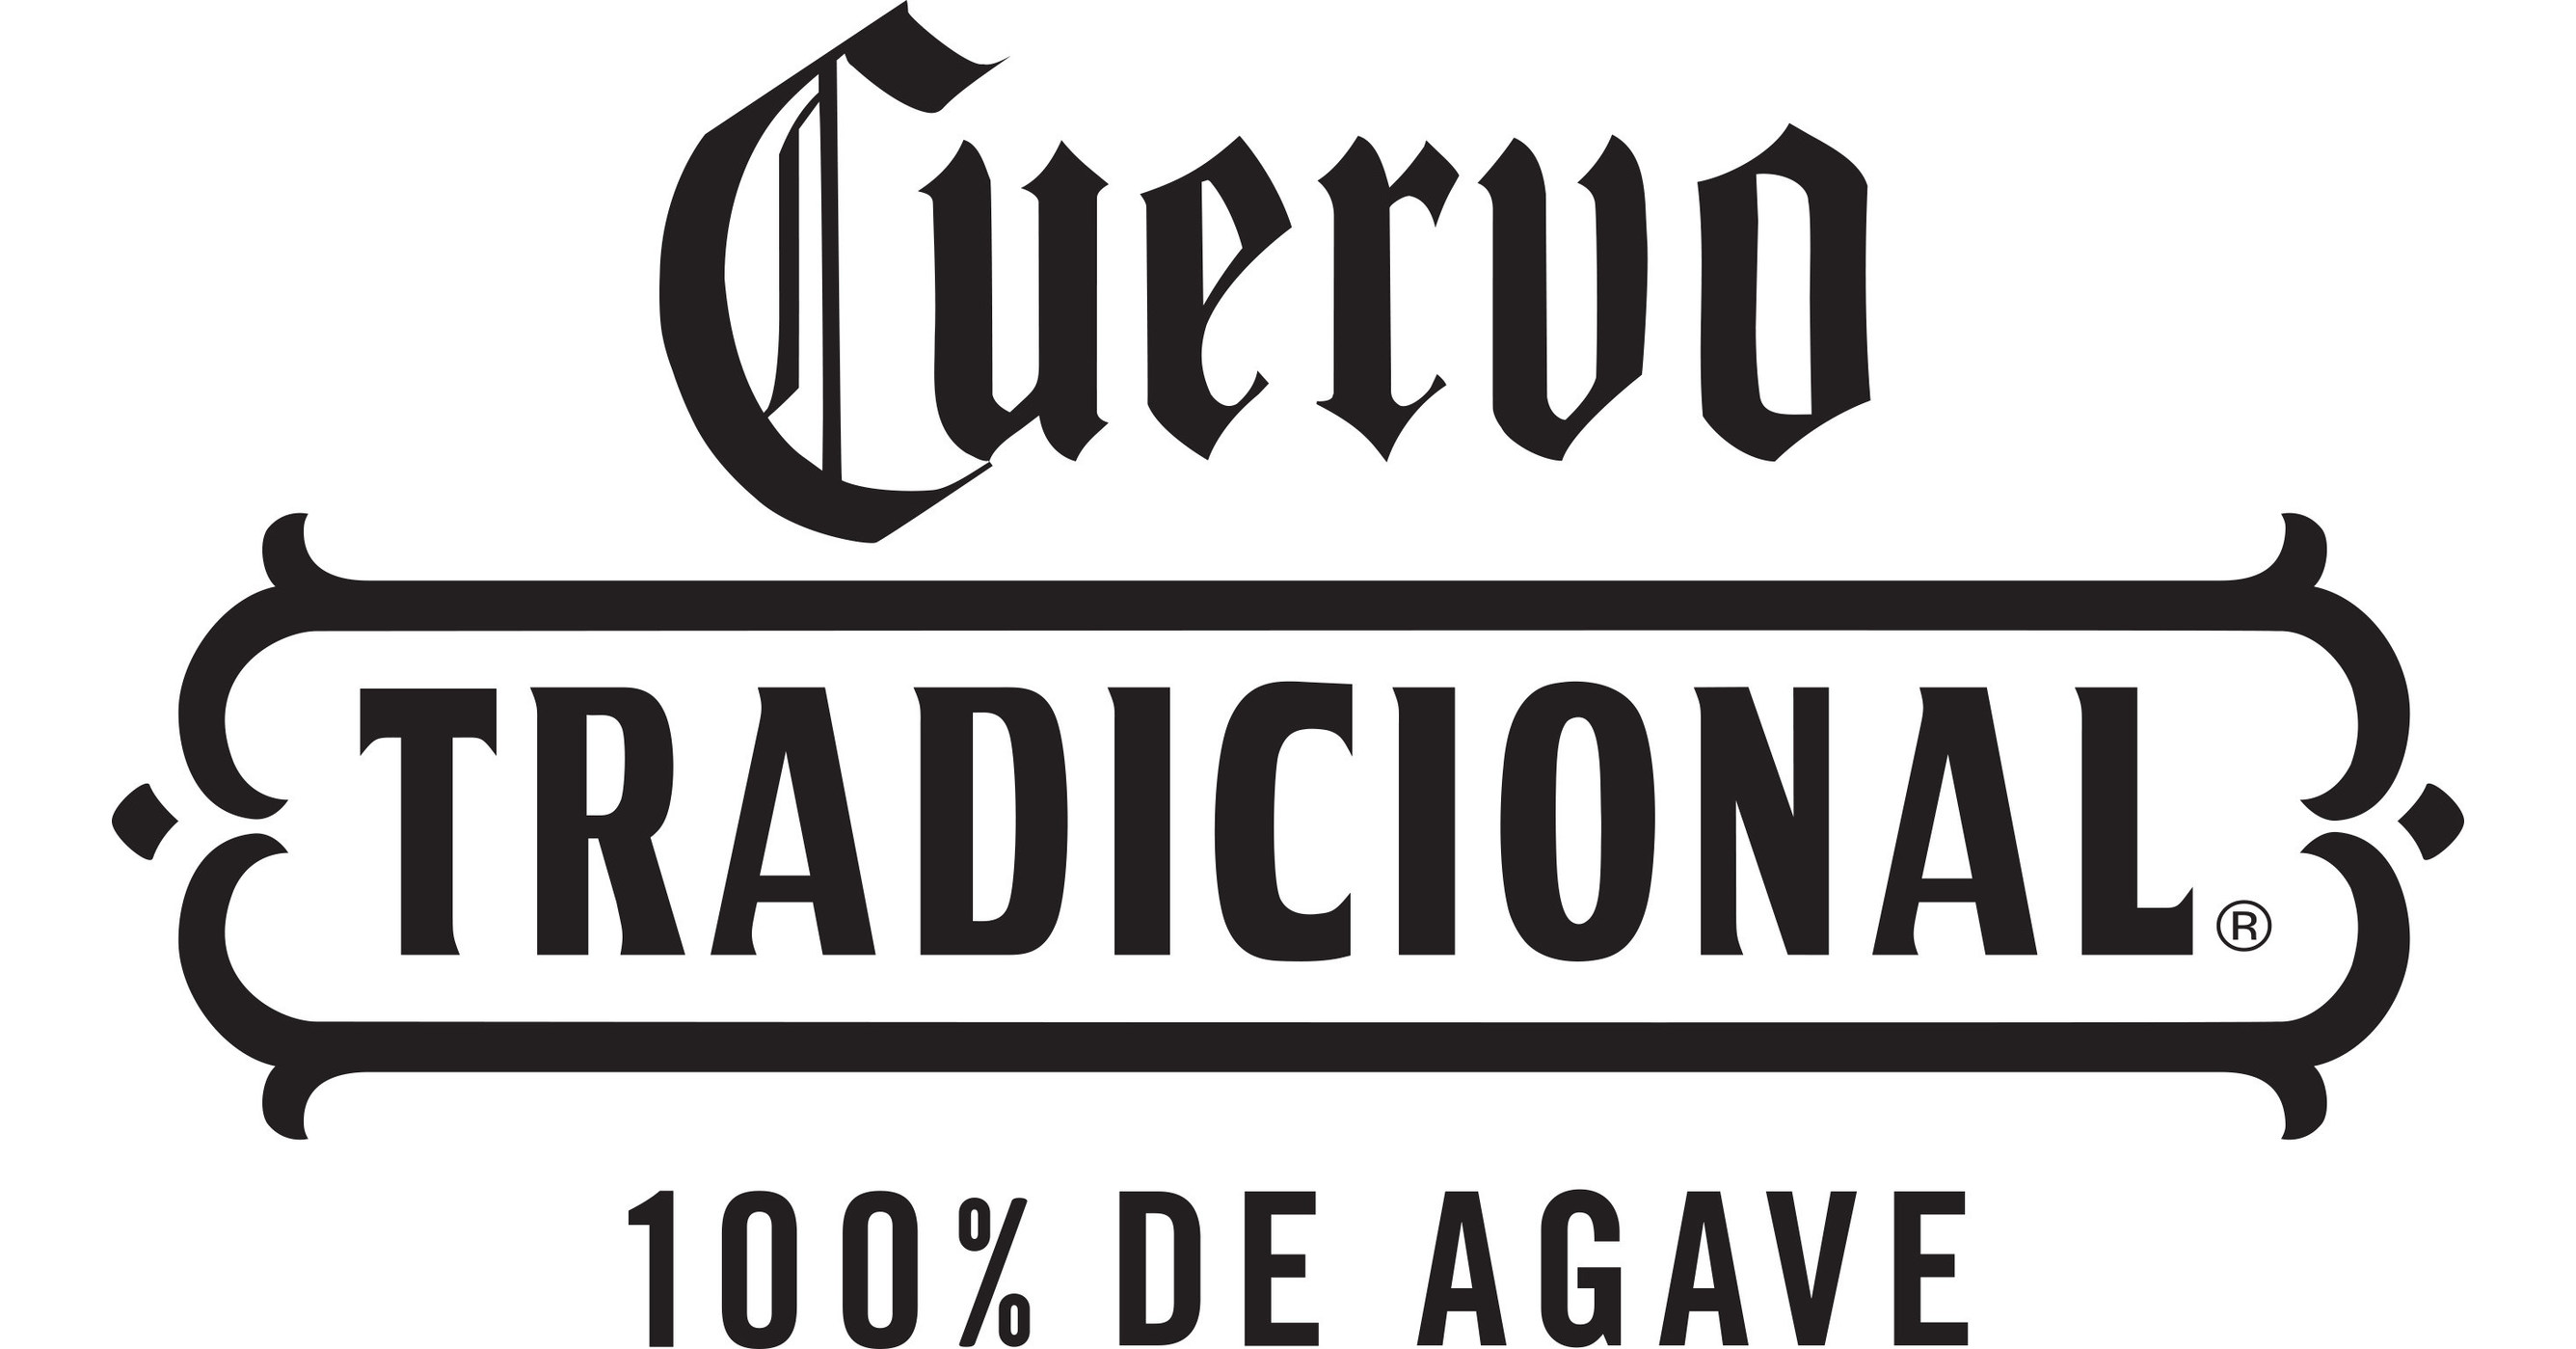 The Agave Project - Jose Cuervo